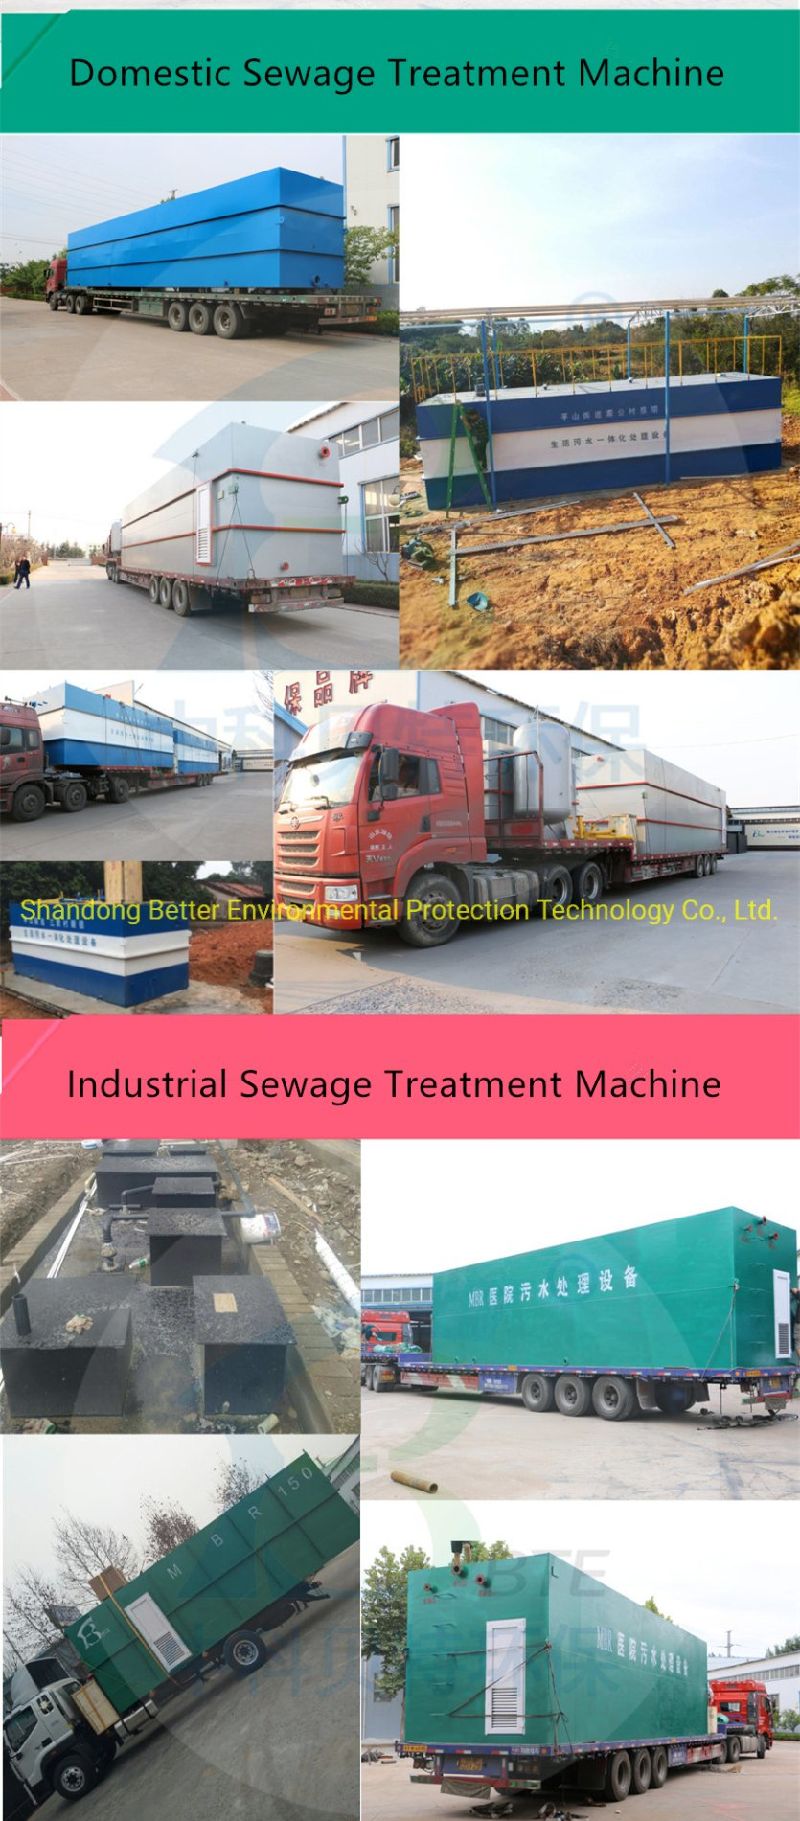 Wastewater Treatment Device for Industrial Wastewater Treatment